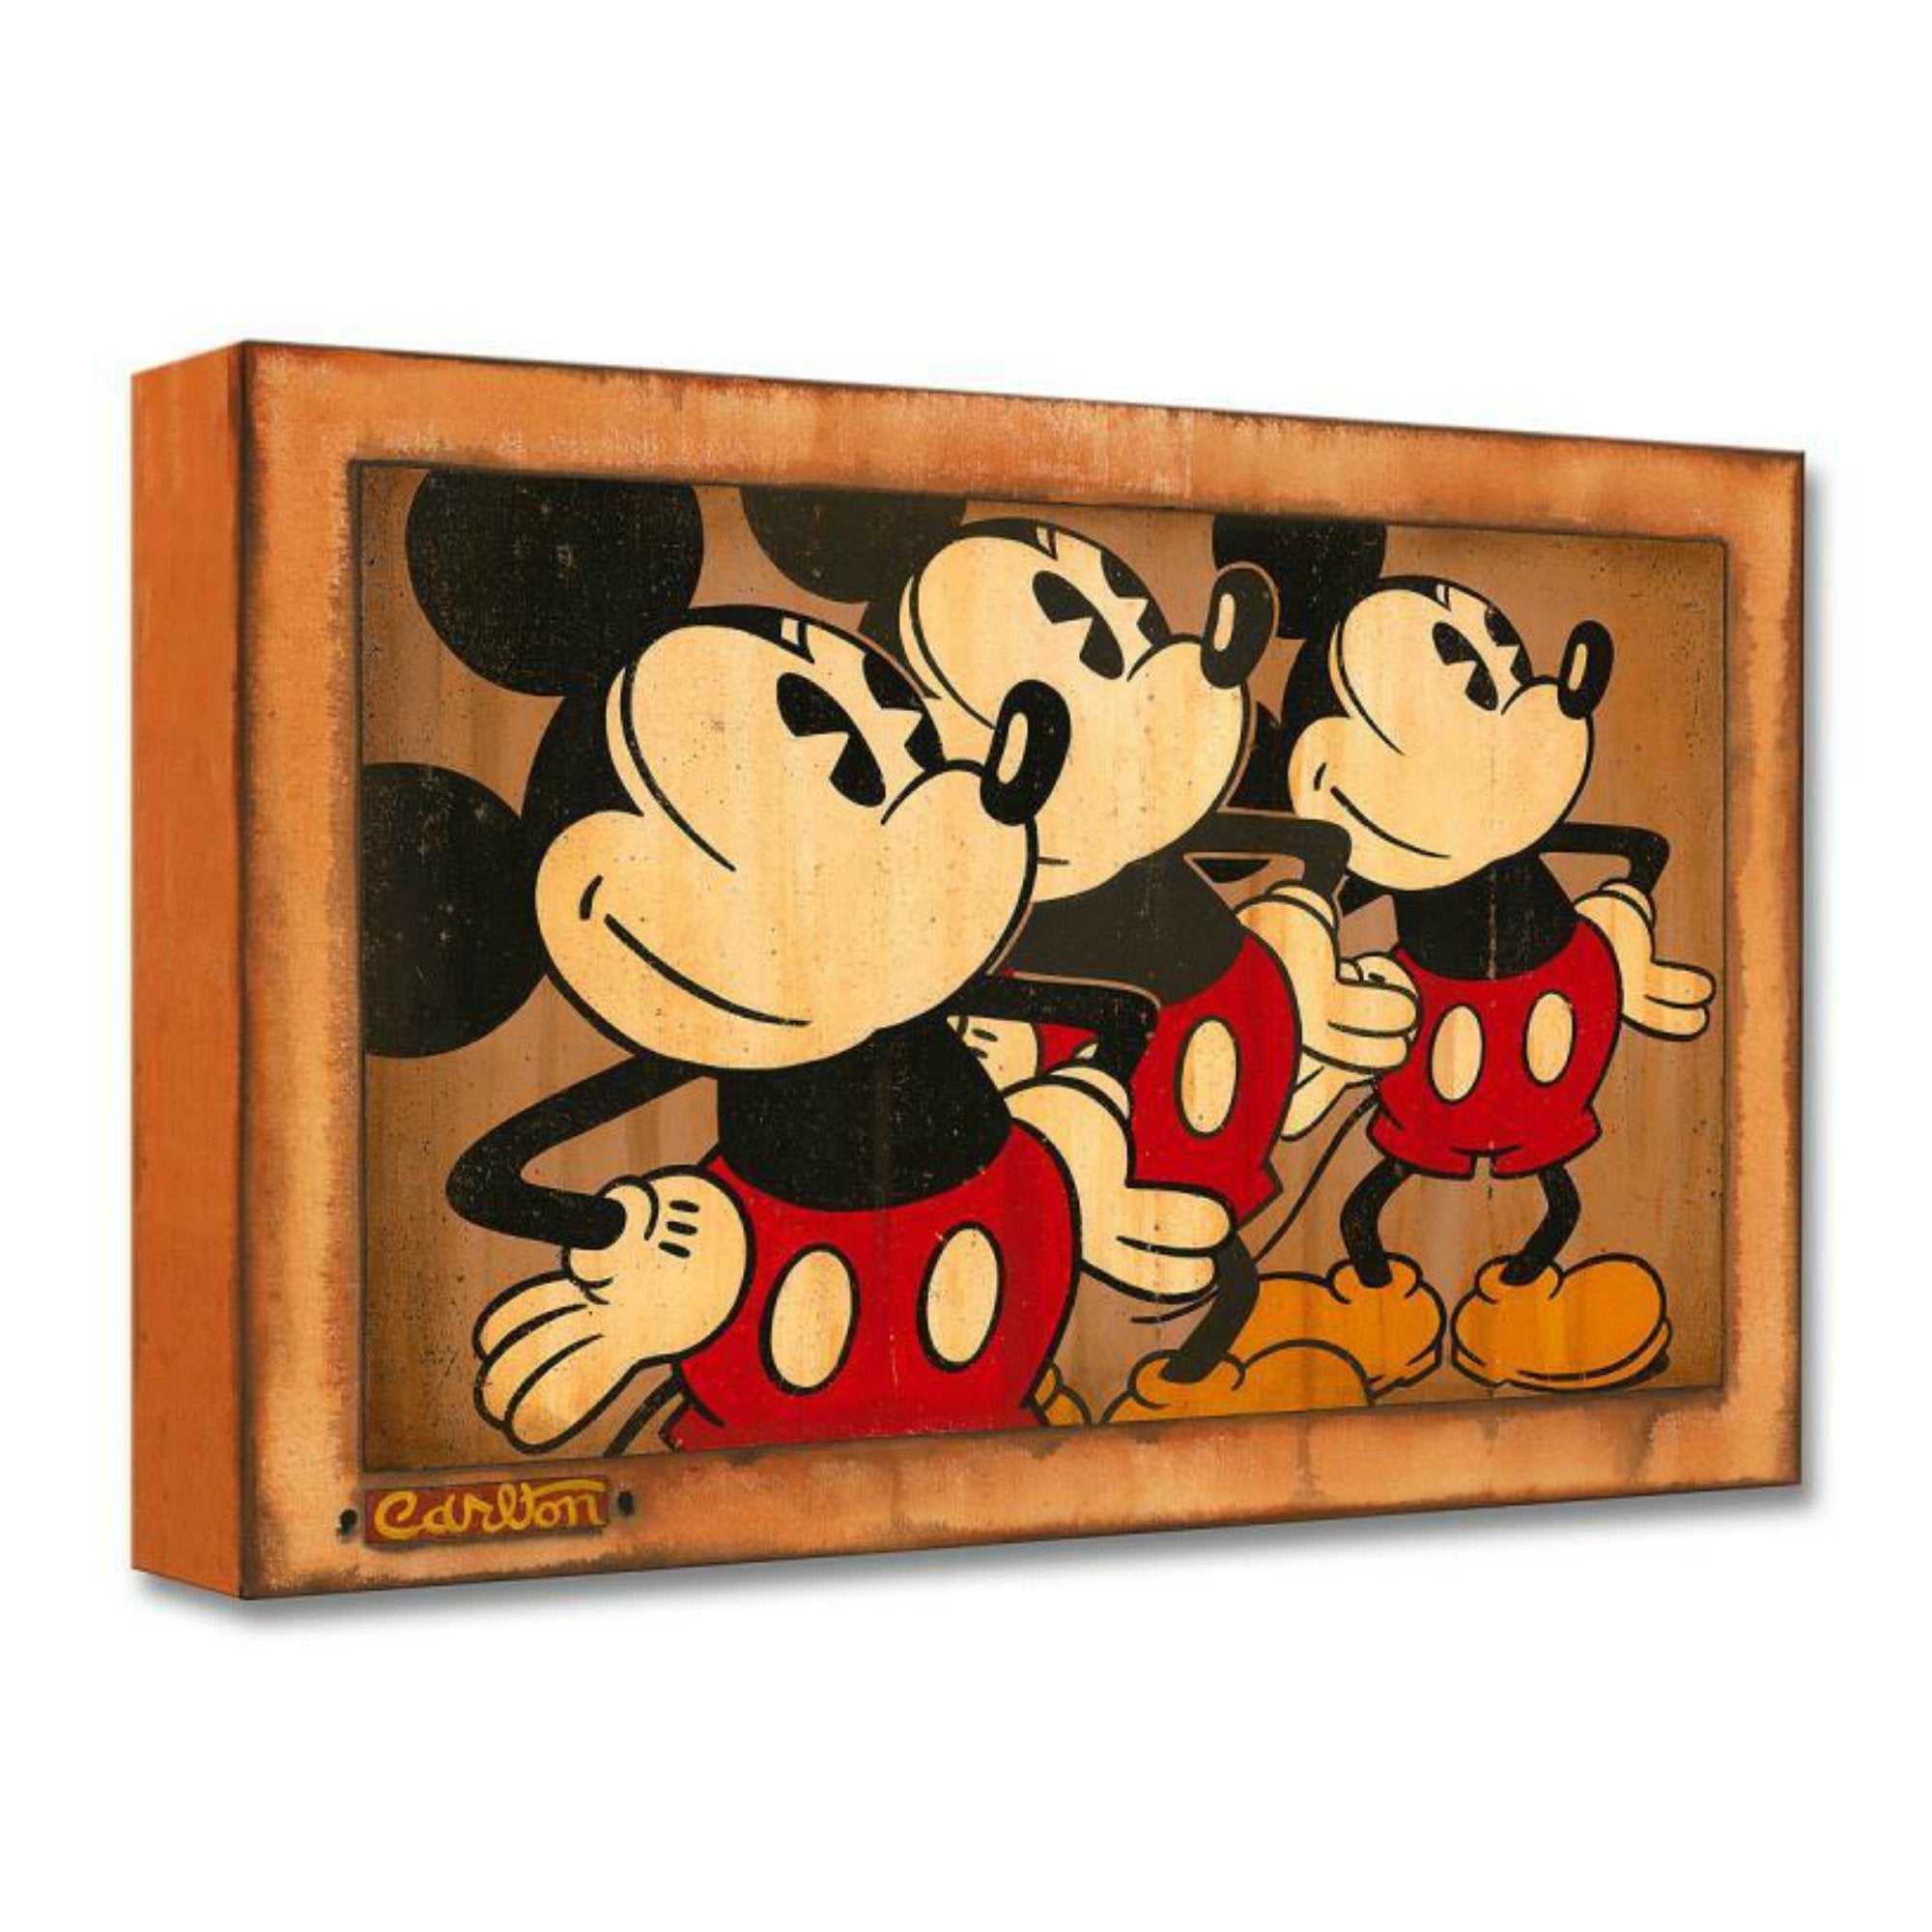 Three Vintage Mickeys by Trevor Carlton  All three Mickeys stand tall with hands resting on the hips.